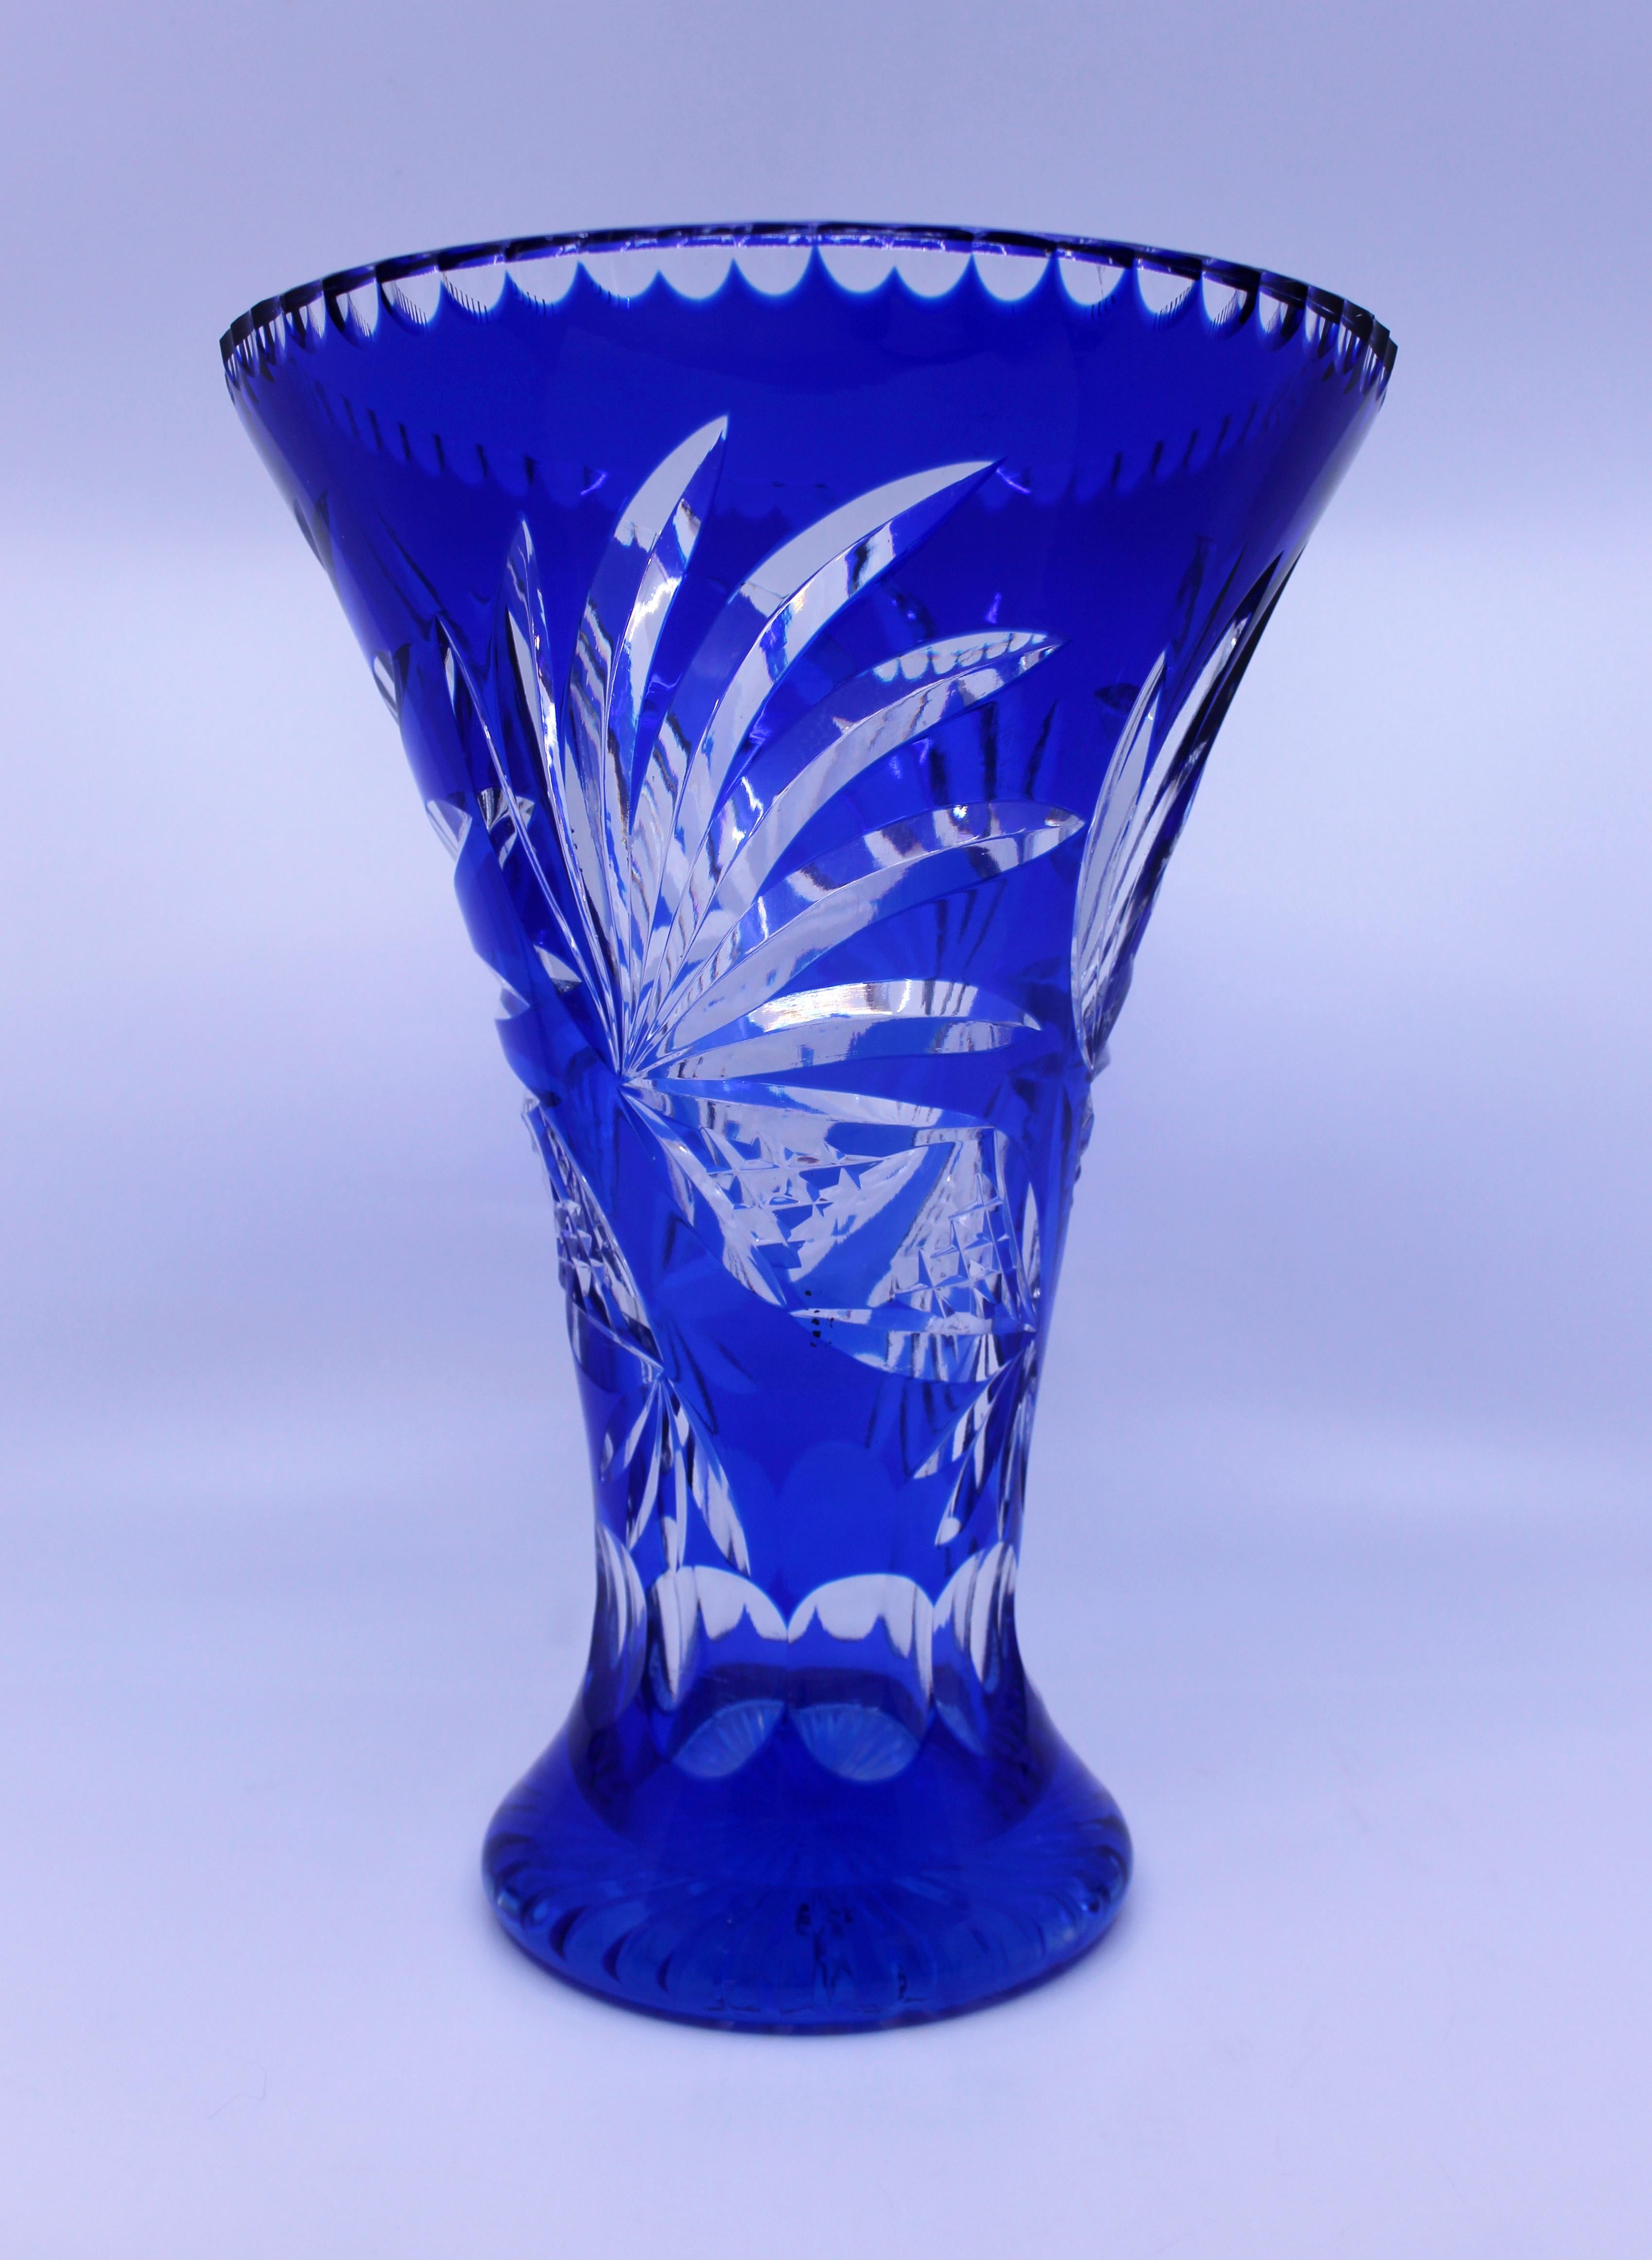 Tall mid-20th century Stourbridge blue overlay crystal flower vase

Origin 
Stourbridge, England

Composition
Cut overlay crystal, blue

Condition 
No chips, cracks or repairs. Light scratches to base commensurate with age. A small error